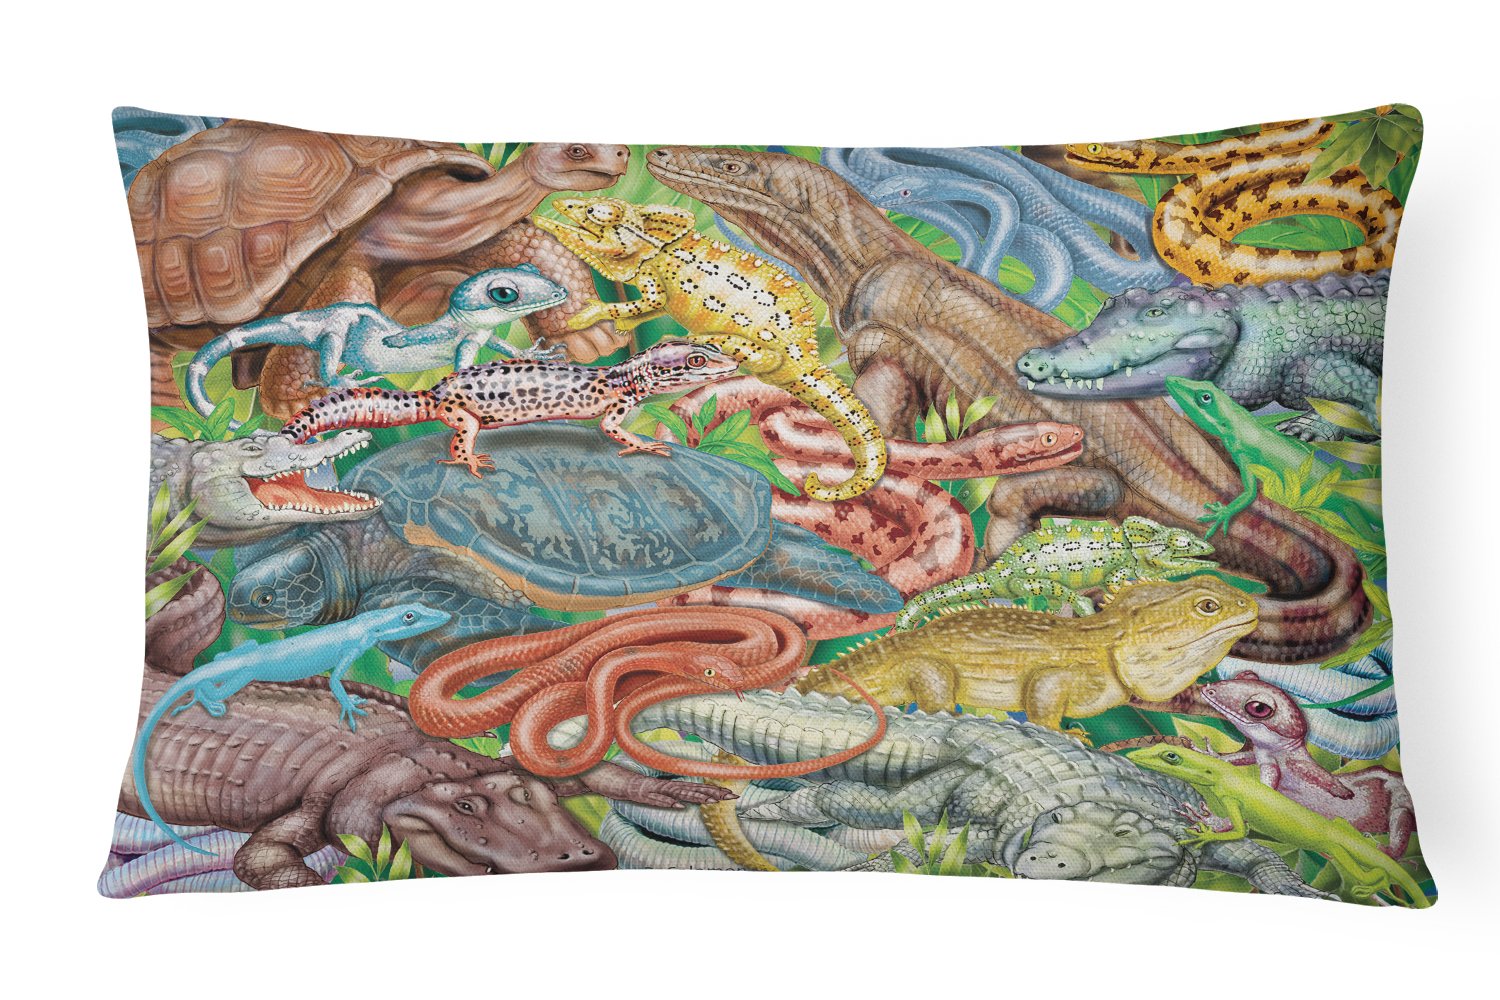 Scales and Tails, Snakes, Turtle, Reptiles Canvas Fabric Decorative Pillow PRS4034PW1216 by Caroline's Treasures